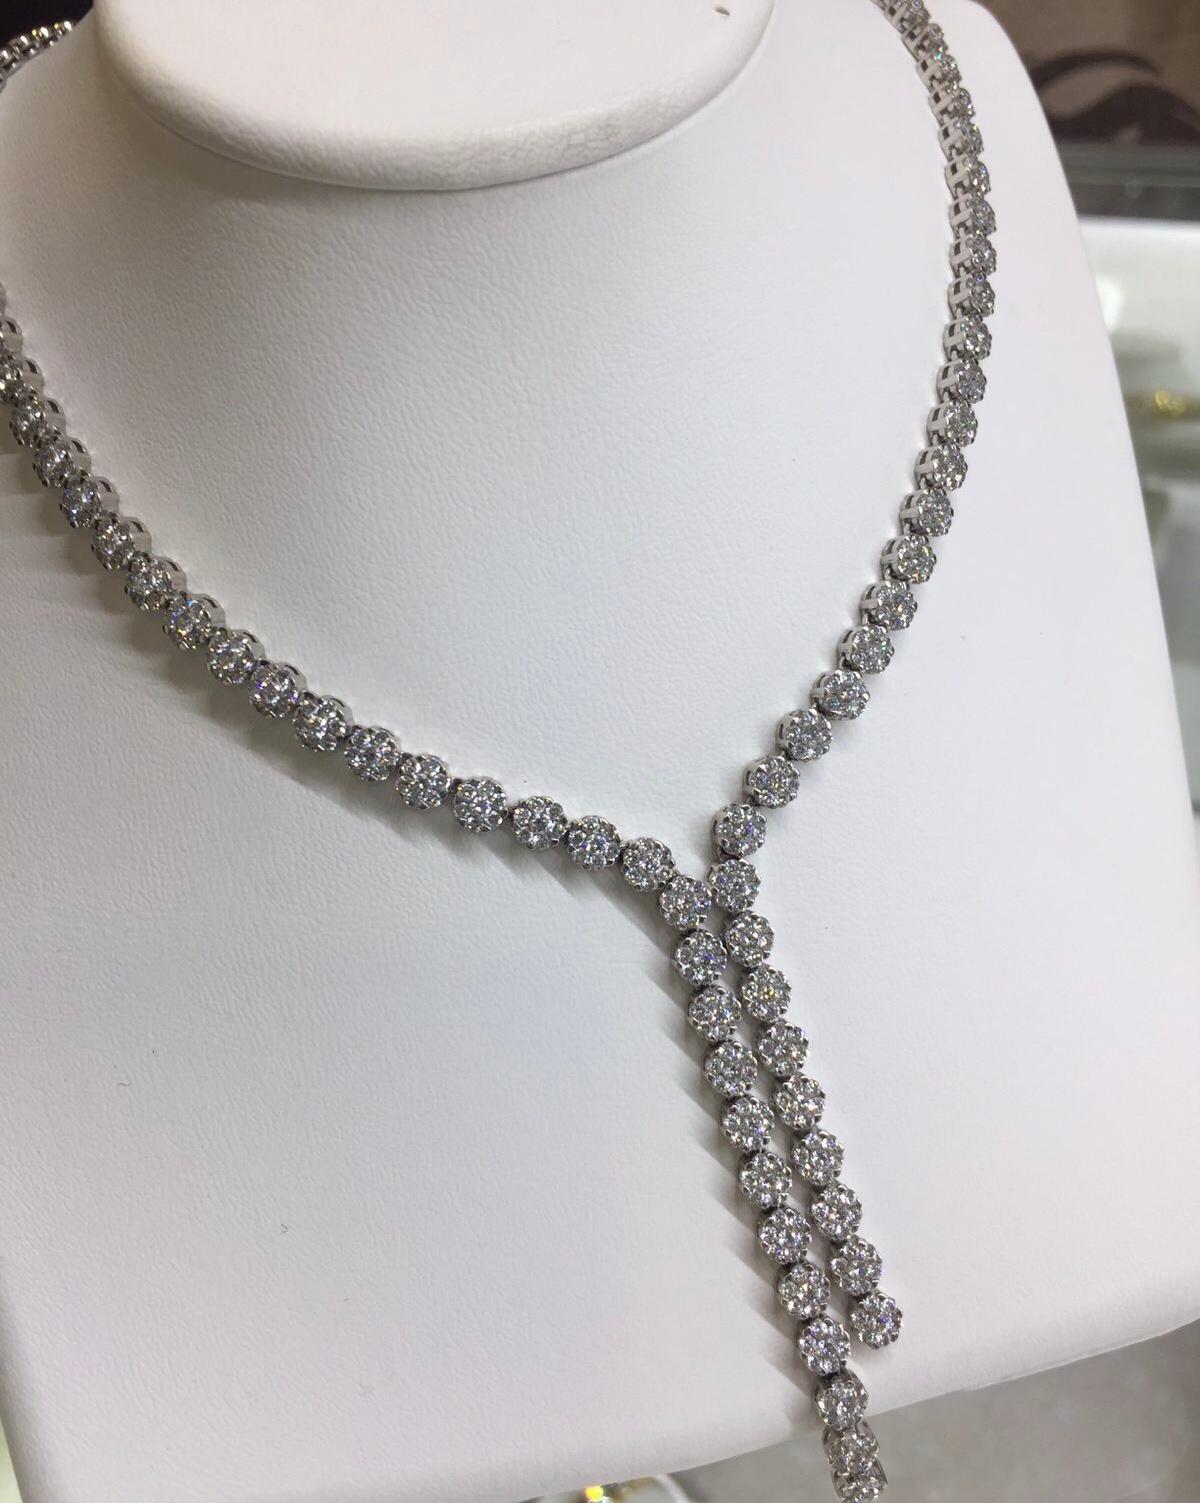 White Gold 14K Necklace 
Weight 23.93 gram
Length 40 cm 
Diamond 67-Round 57-1,93-VVS 1
Diamond 402-Round 57-6,4-VVS 1

With a heritage of ancient fine Swiss jewelry traditions, NATKINA is a Geneva based jewellery brand, which creates modern